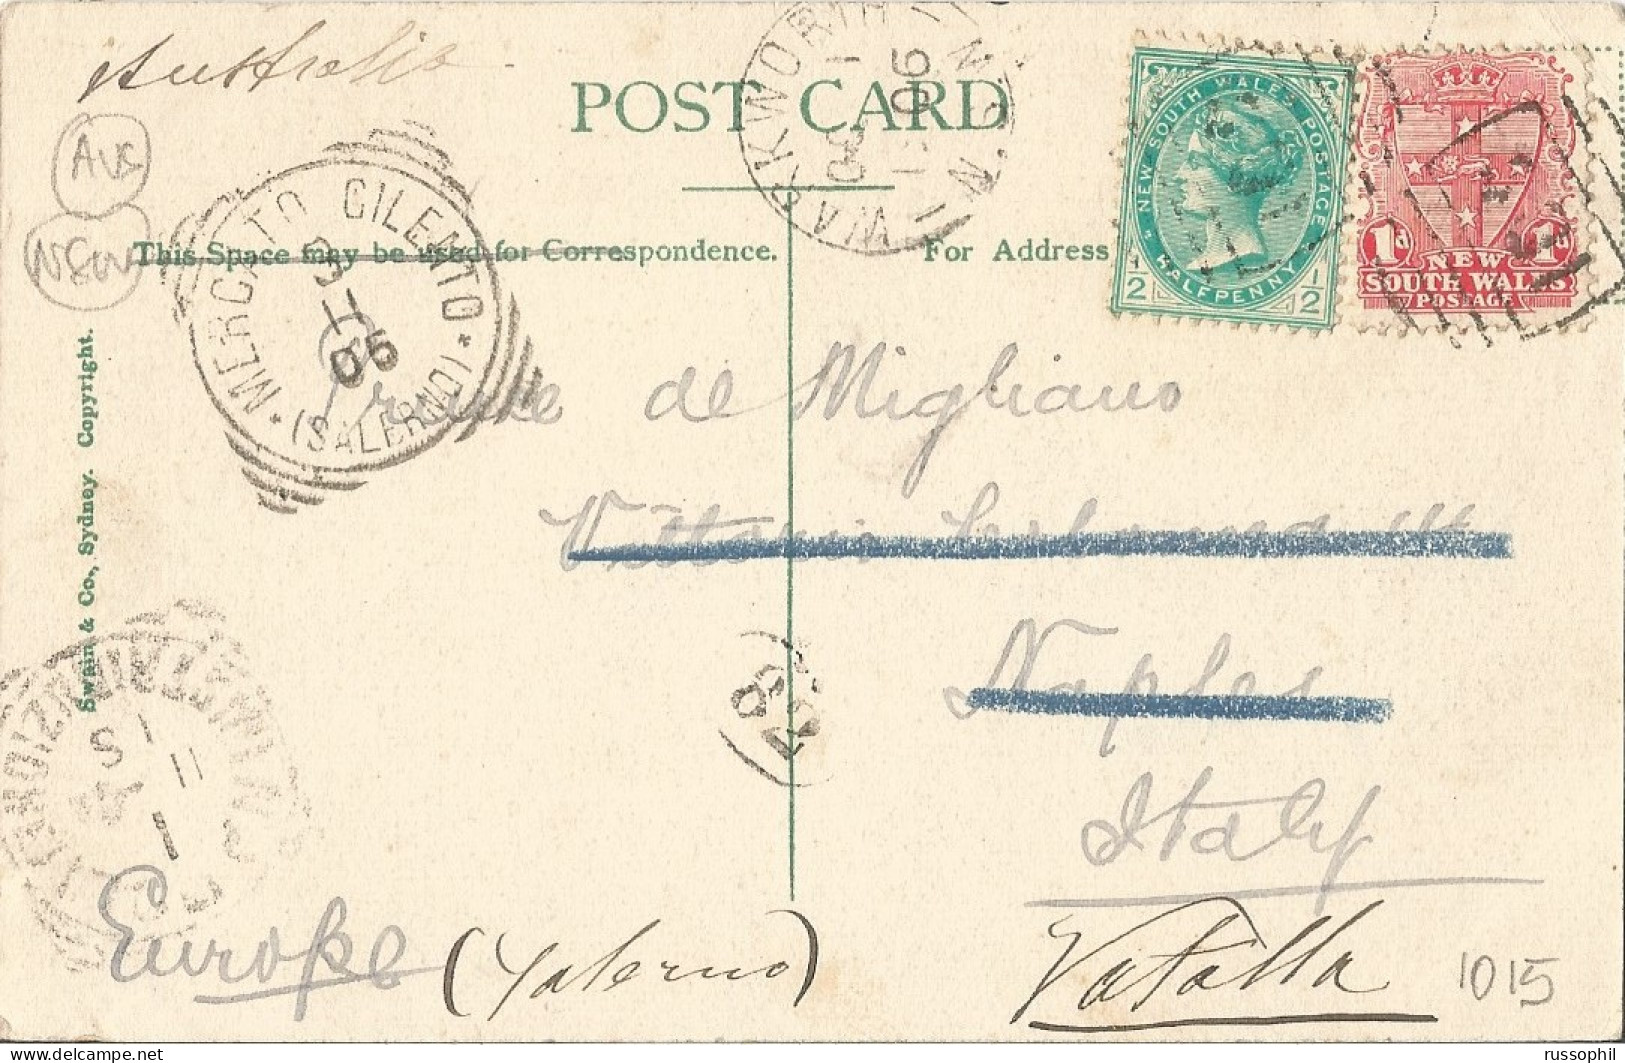 AUSTRALIA NSW - FRANKED PC (VIEW OF SYDNEY) FROM WARKWORTH TO ITALY - BARRED NUMERAL CANCEL 401 - 1905 - Covers & Documents